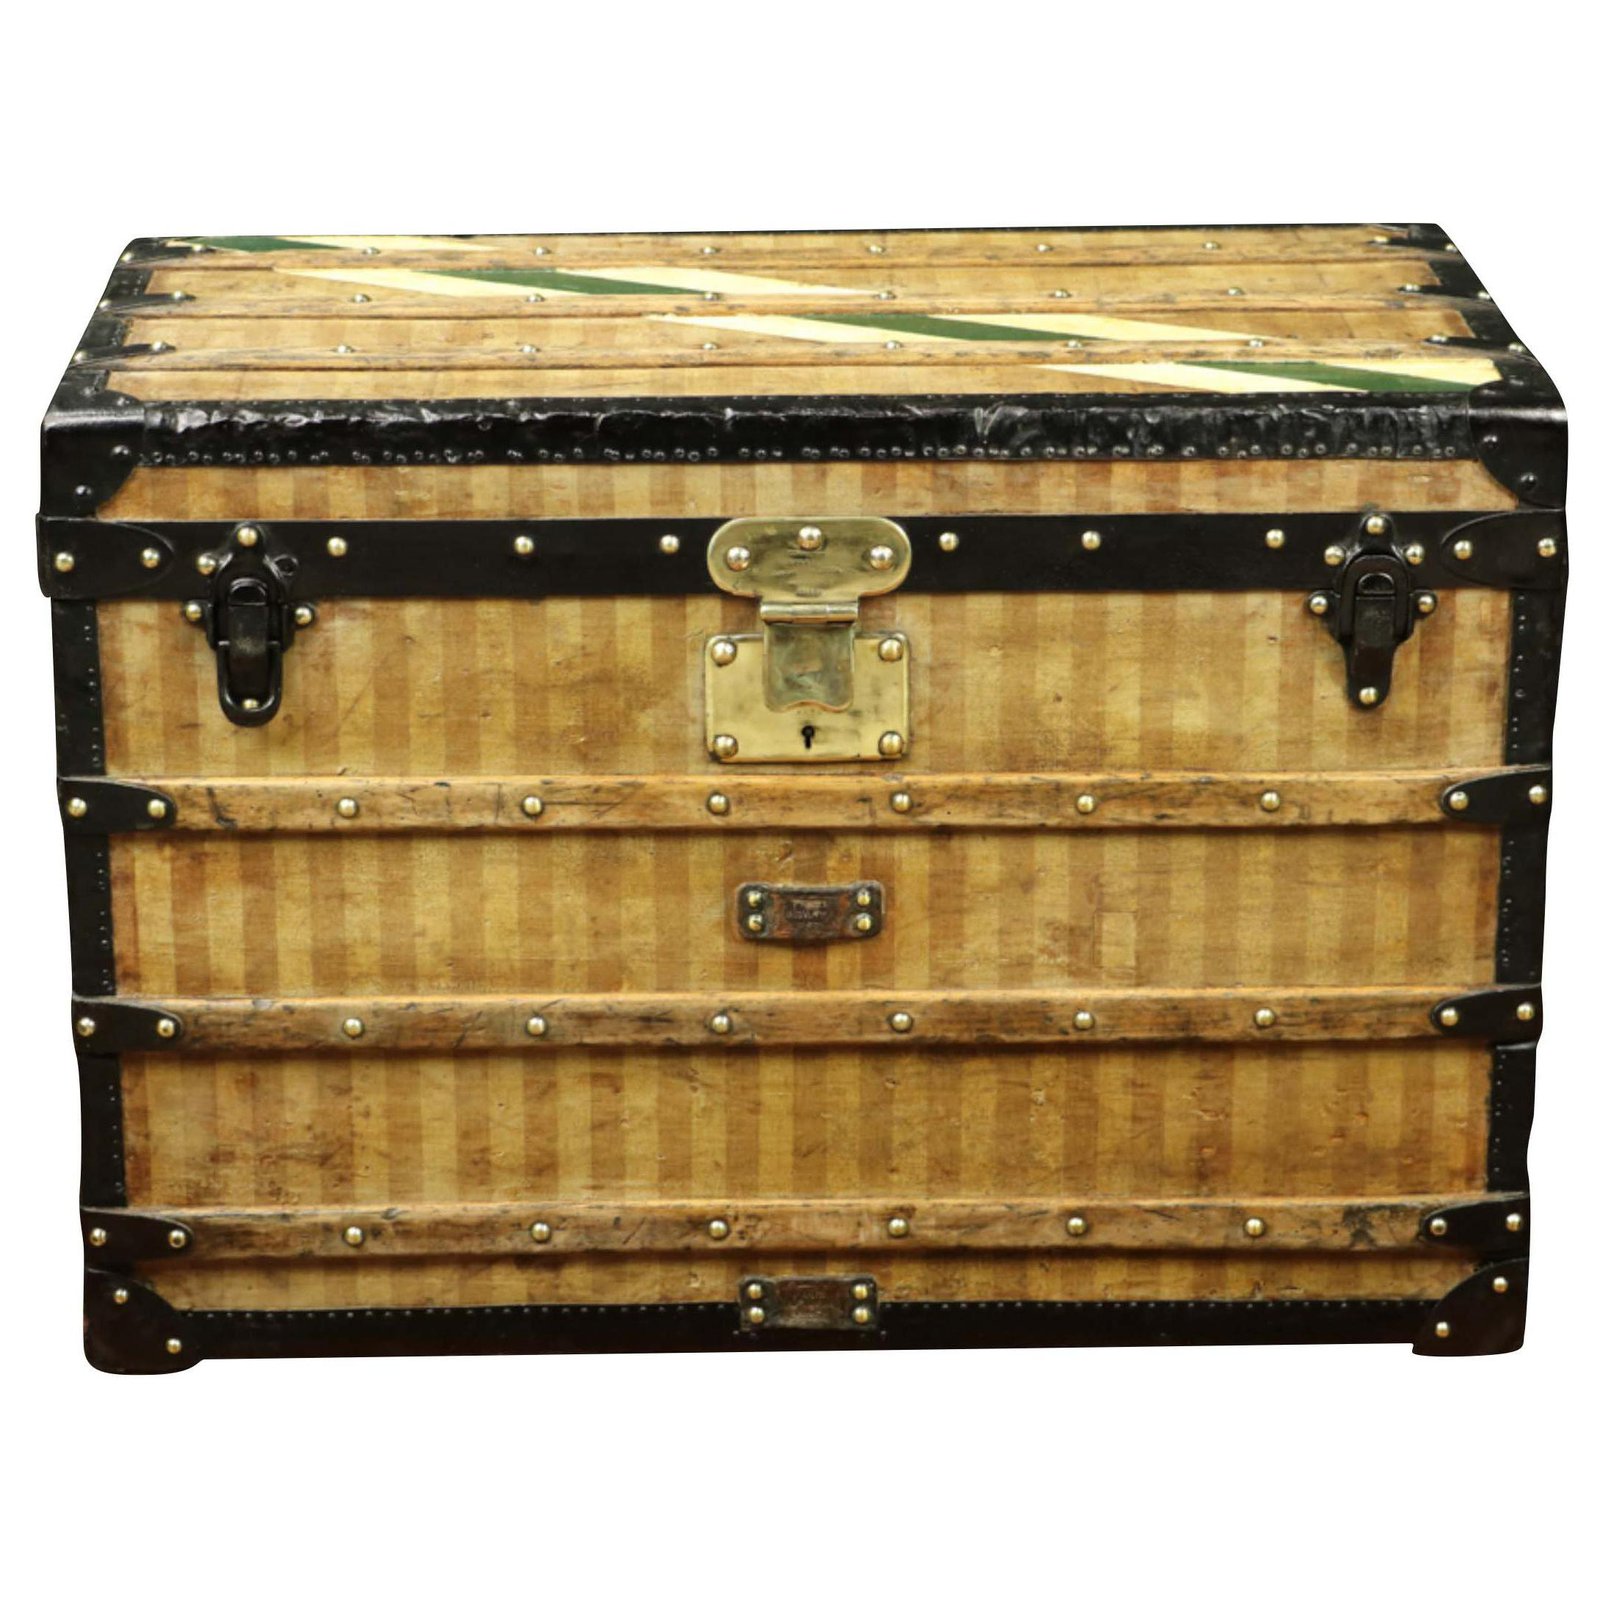 Restoration of a Louis Vuitton striped trunk from 1870: state